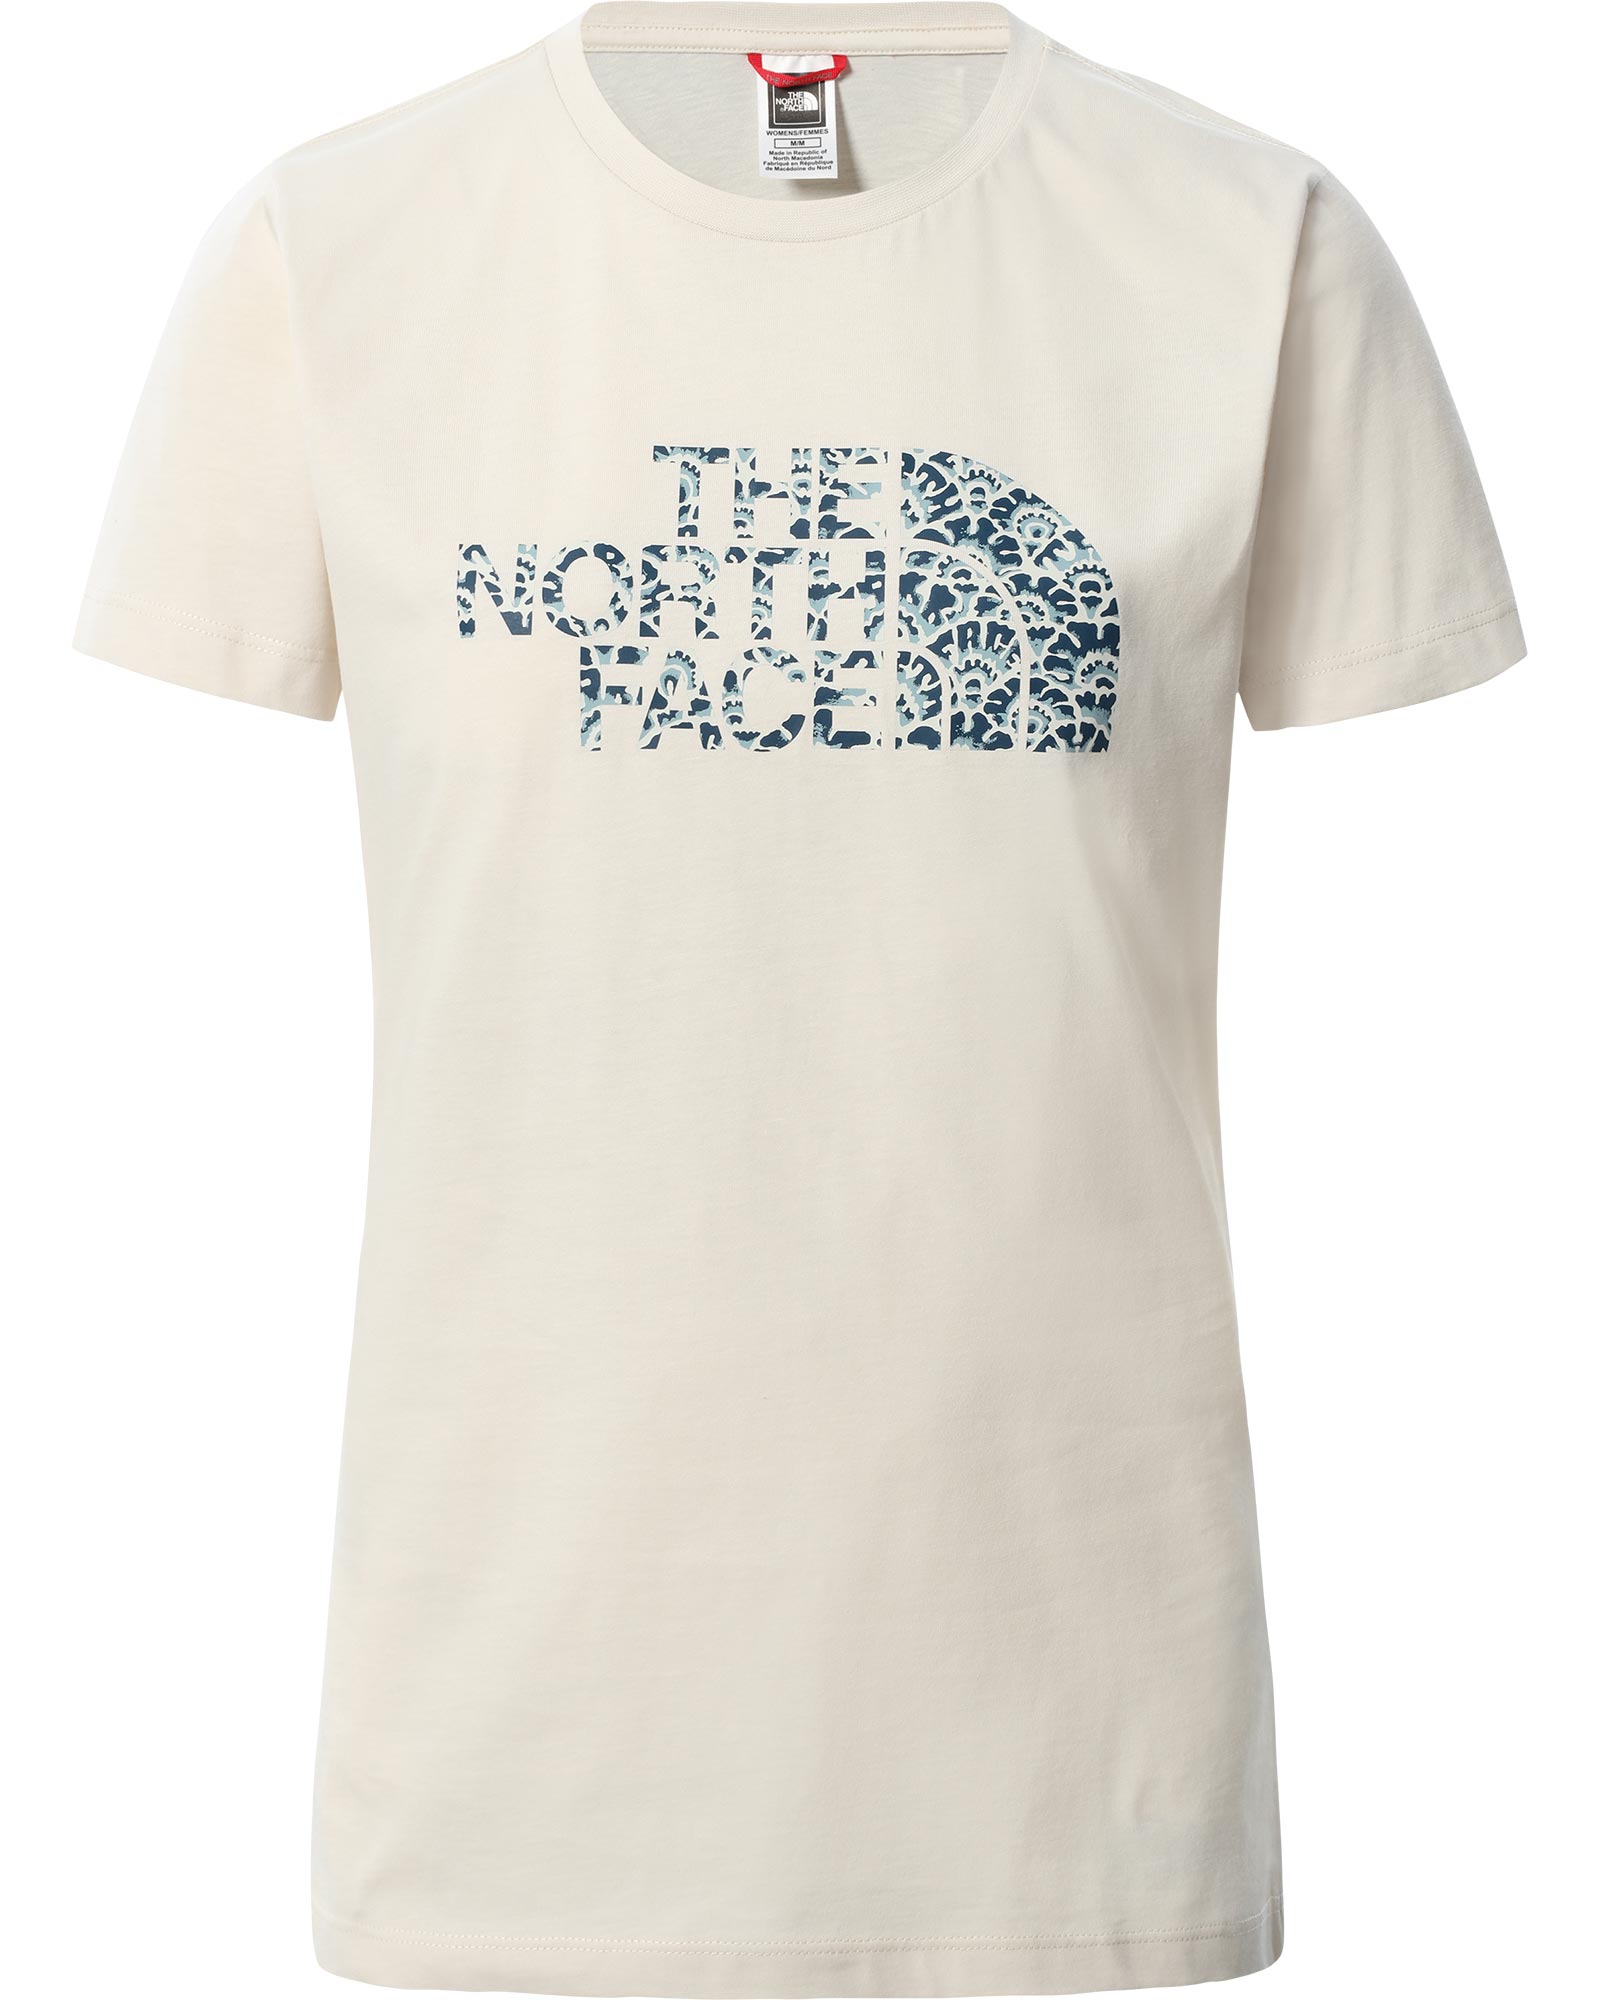 Product image of The North Face easy Women's T-Shirt